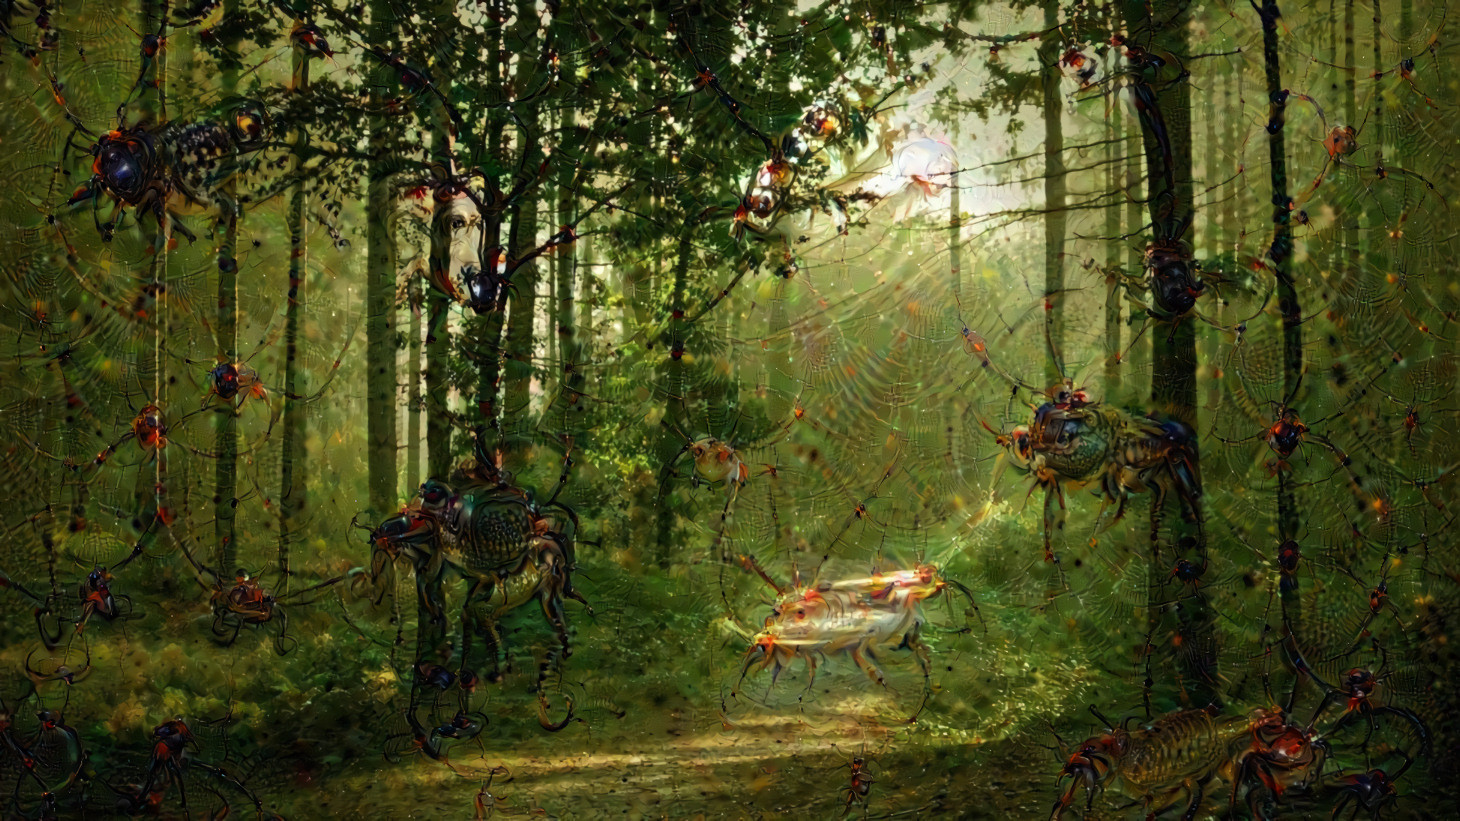 Insect forest